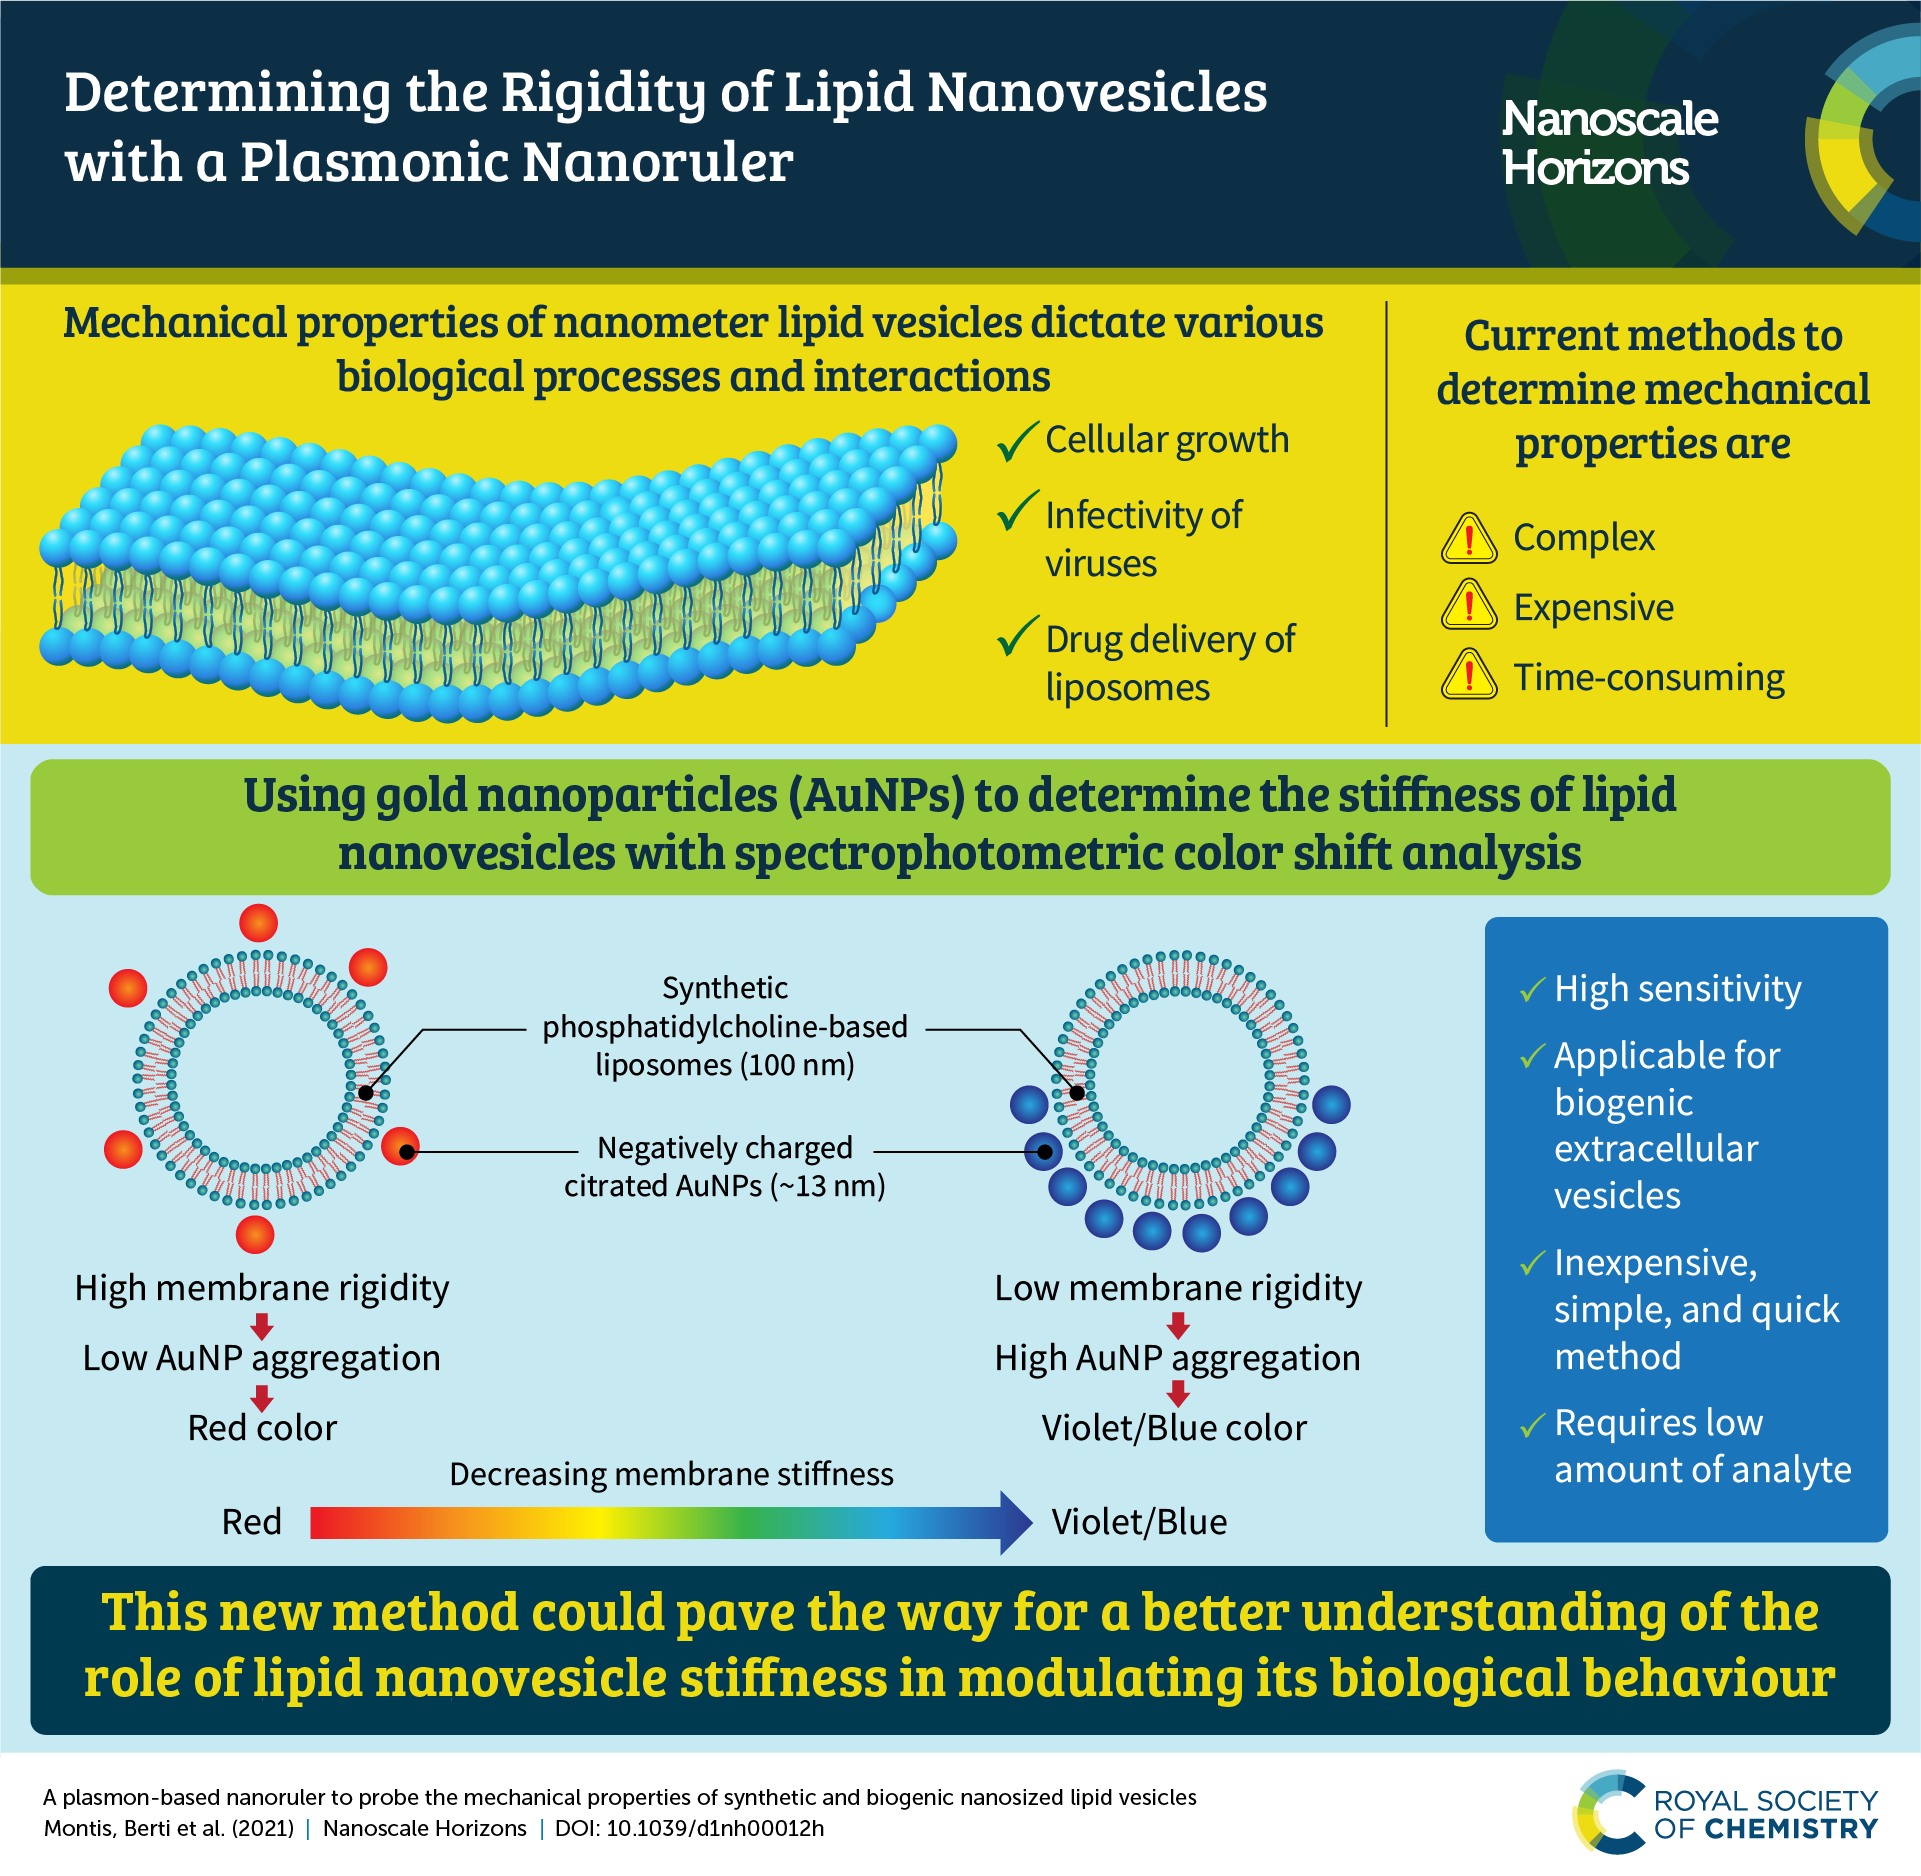 An infographic summarising the content of the article “A plasmon-based nanoruler to probe the mechanical properties of synthetic and biogenic nanosized lipid vesicles"